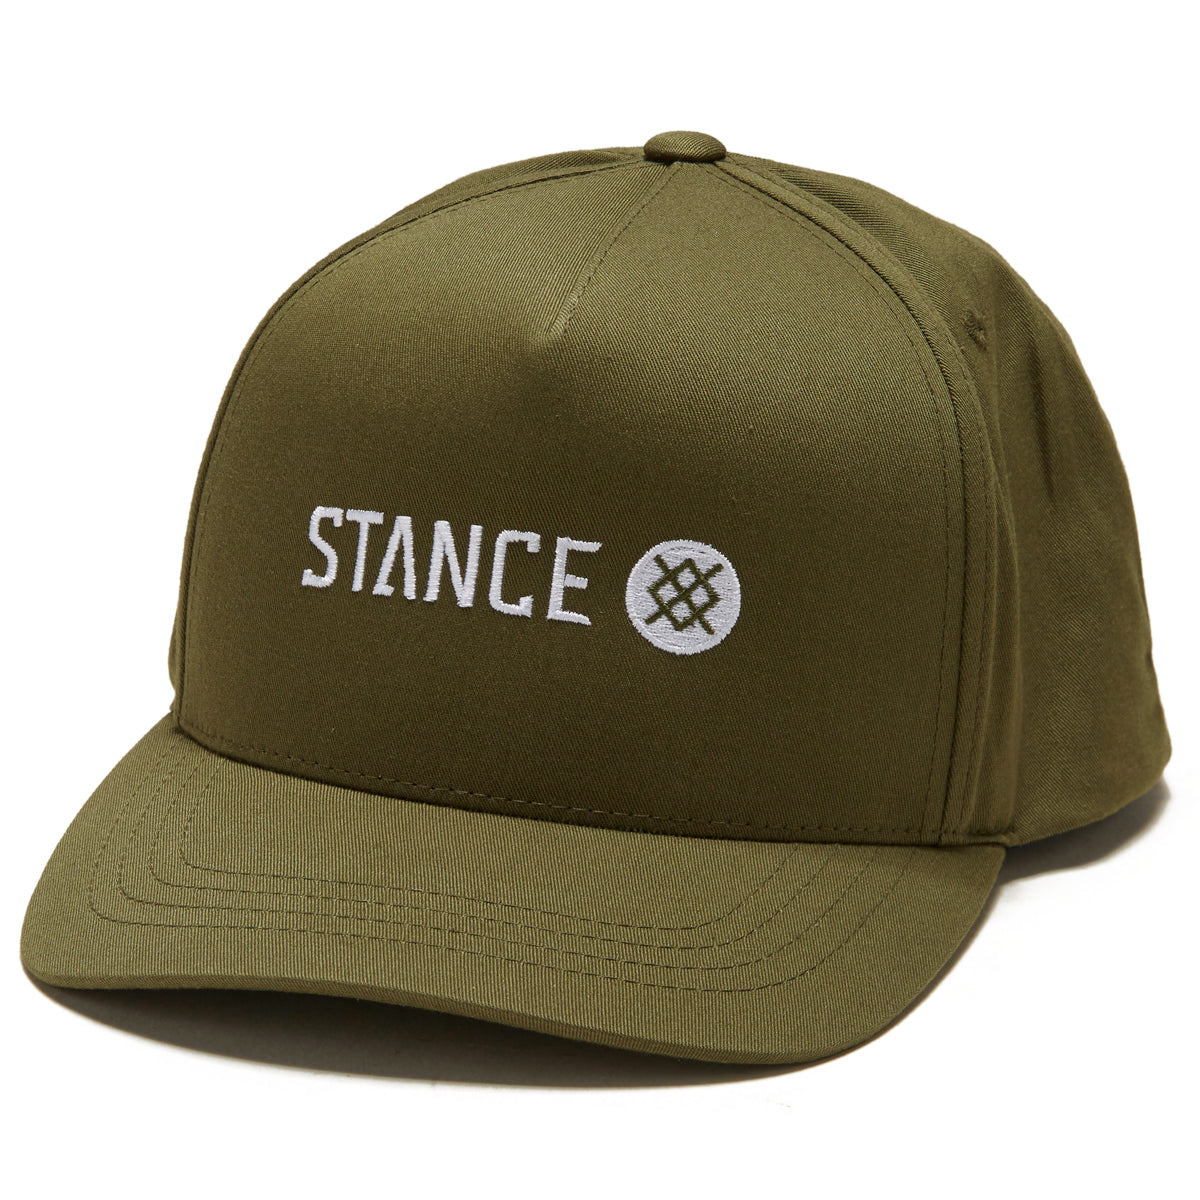 Stance Icon Snapback Hat - Military Green image 1